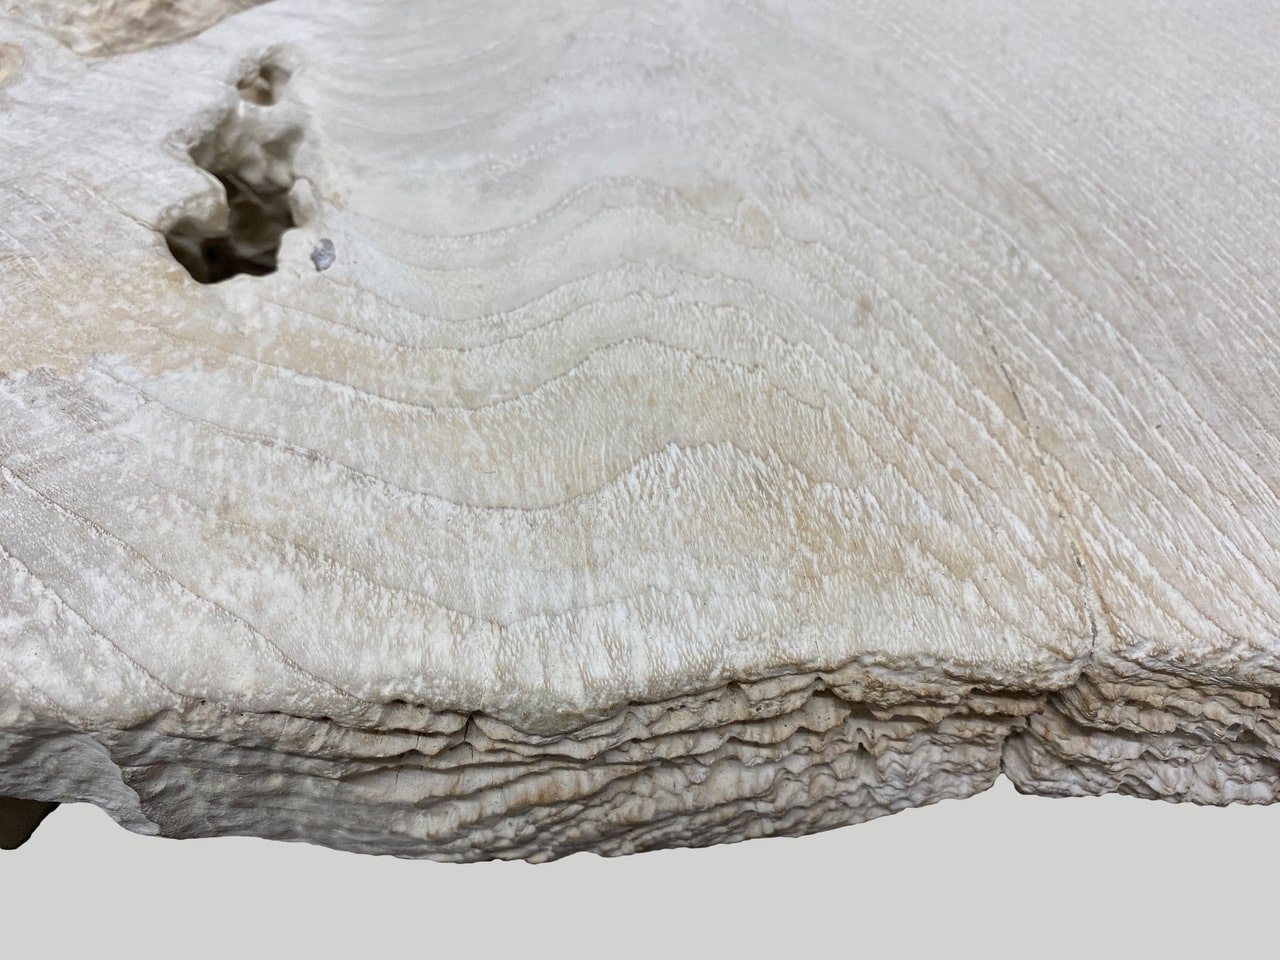 bleached teak coffee table or bench with natural erosion